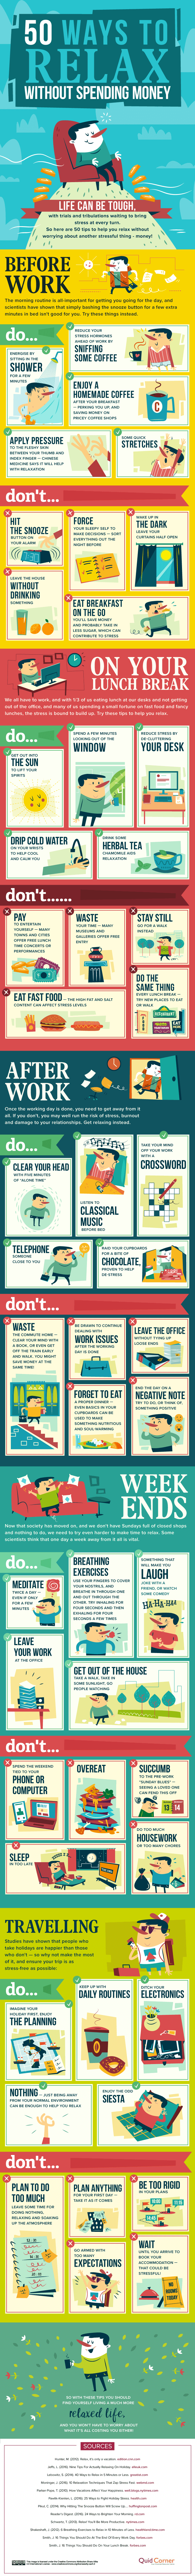 50 Ways to Relax Without Spending Money - Infographic